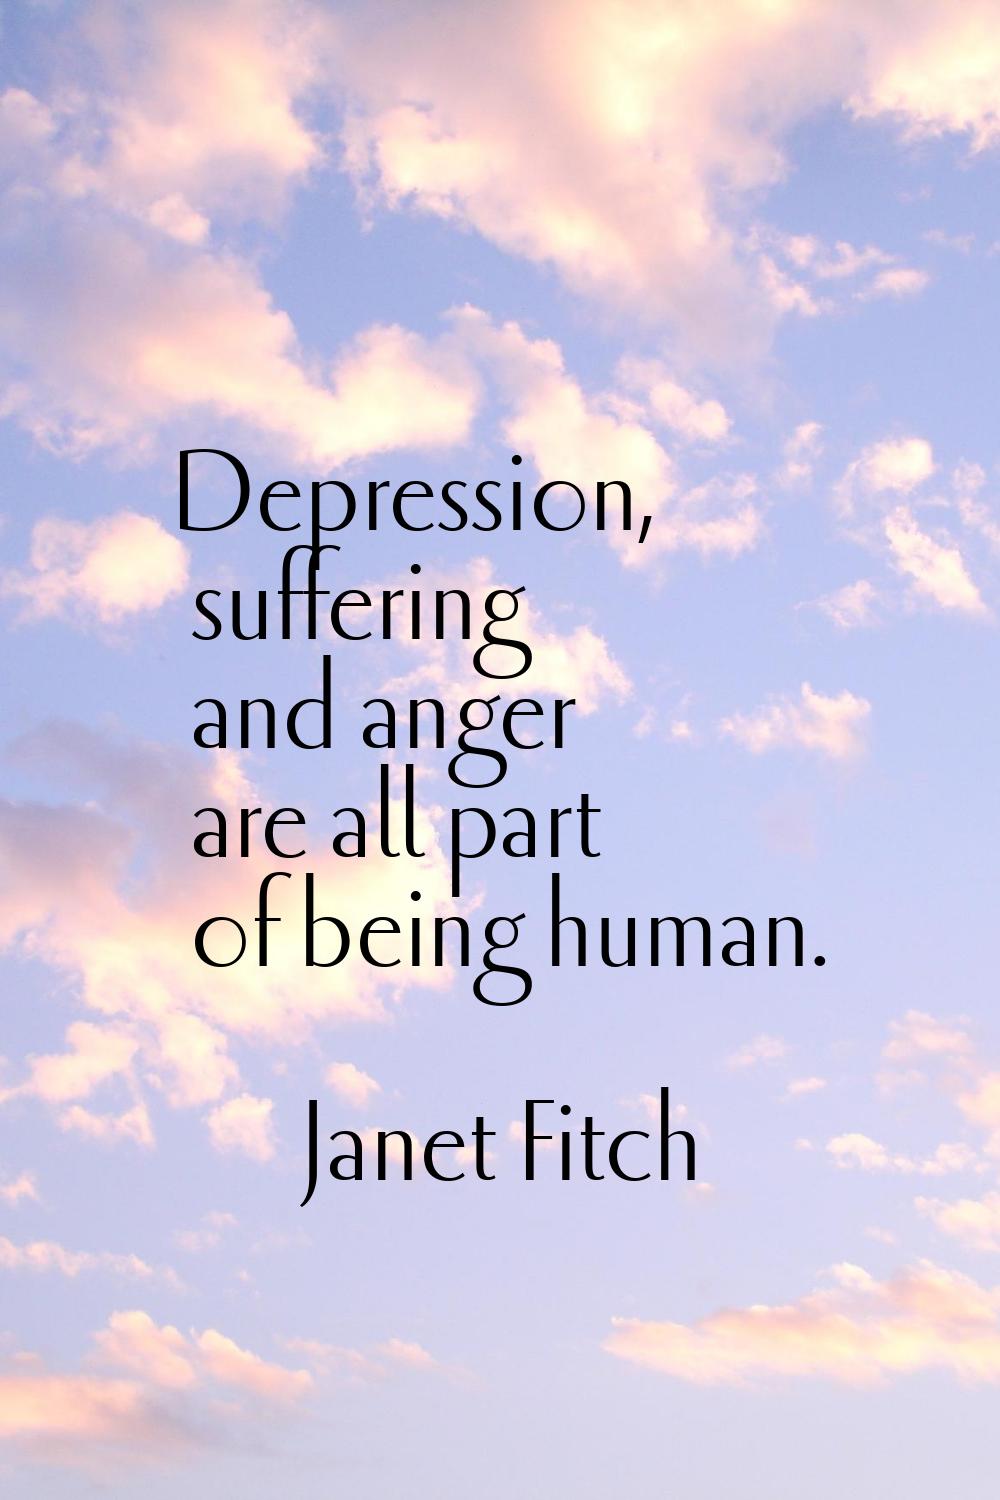 Depression, suffering and anger are all part of being human.